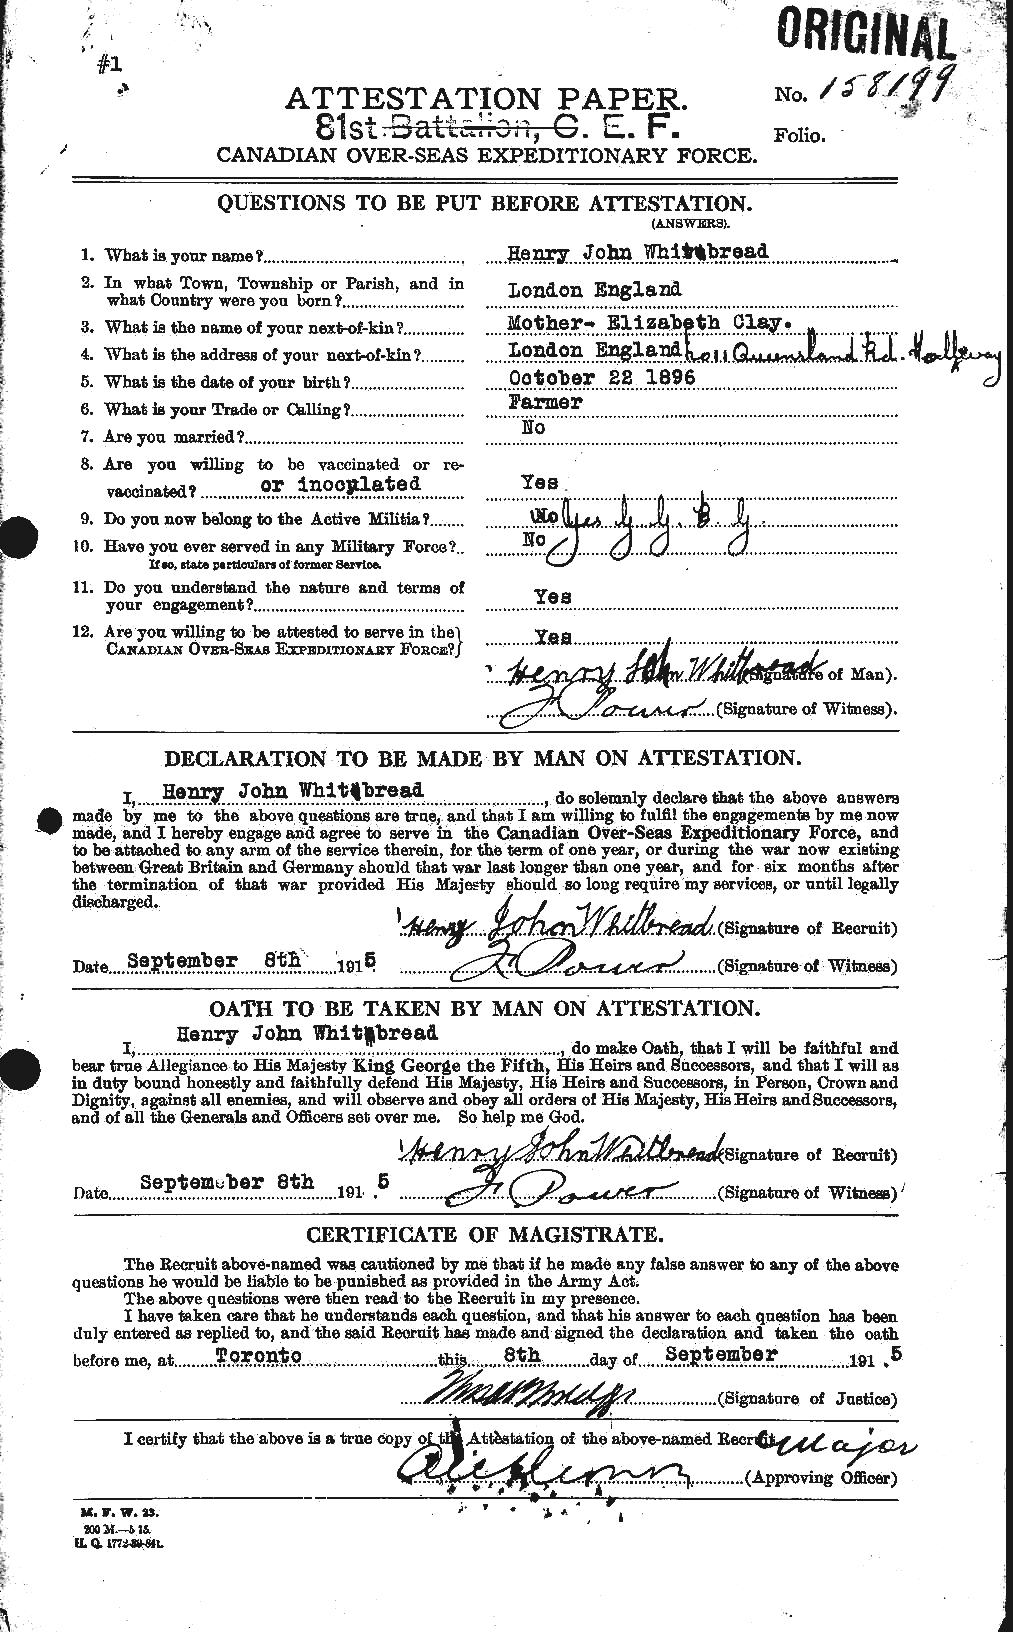 Personnel Records of the First World War - CEF 668871a